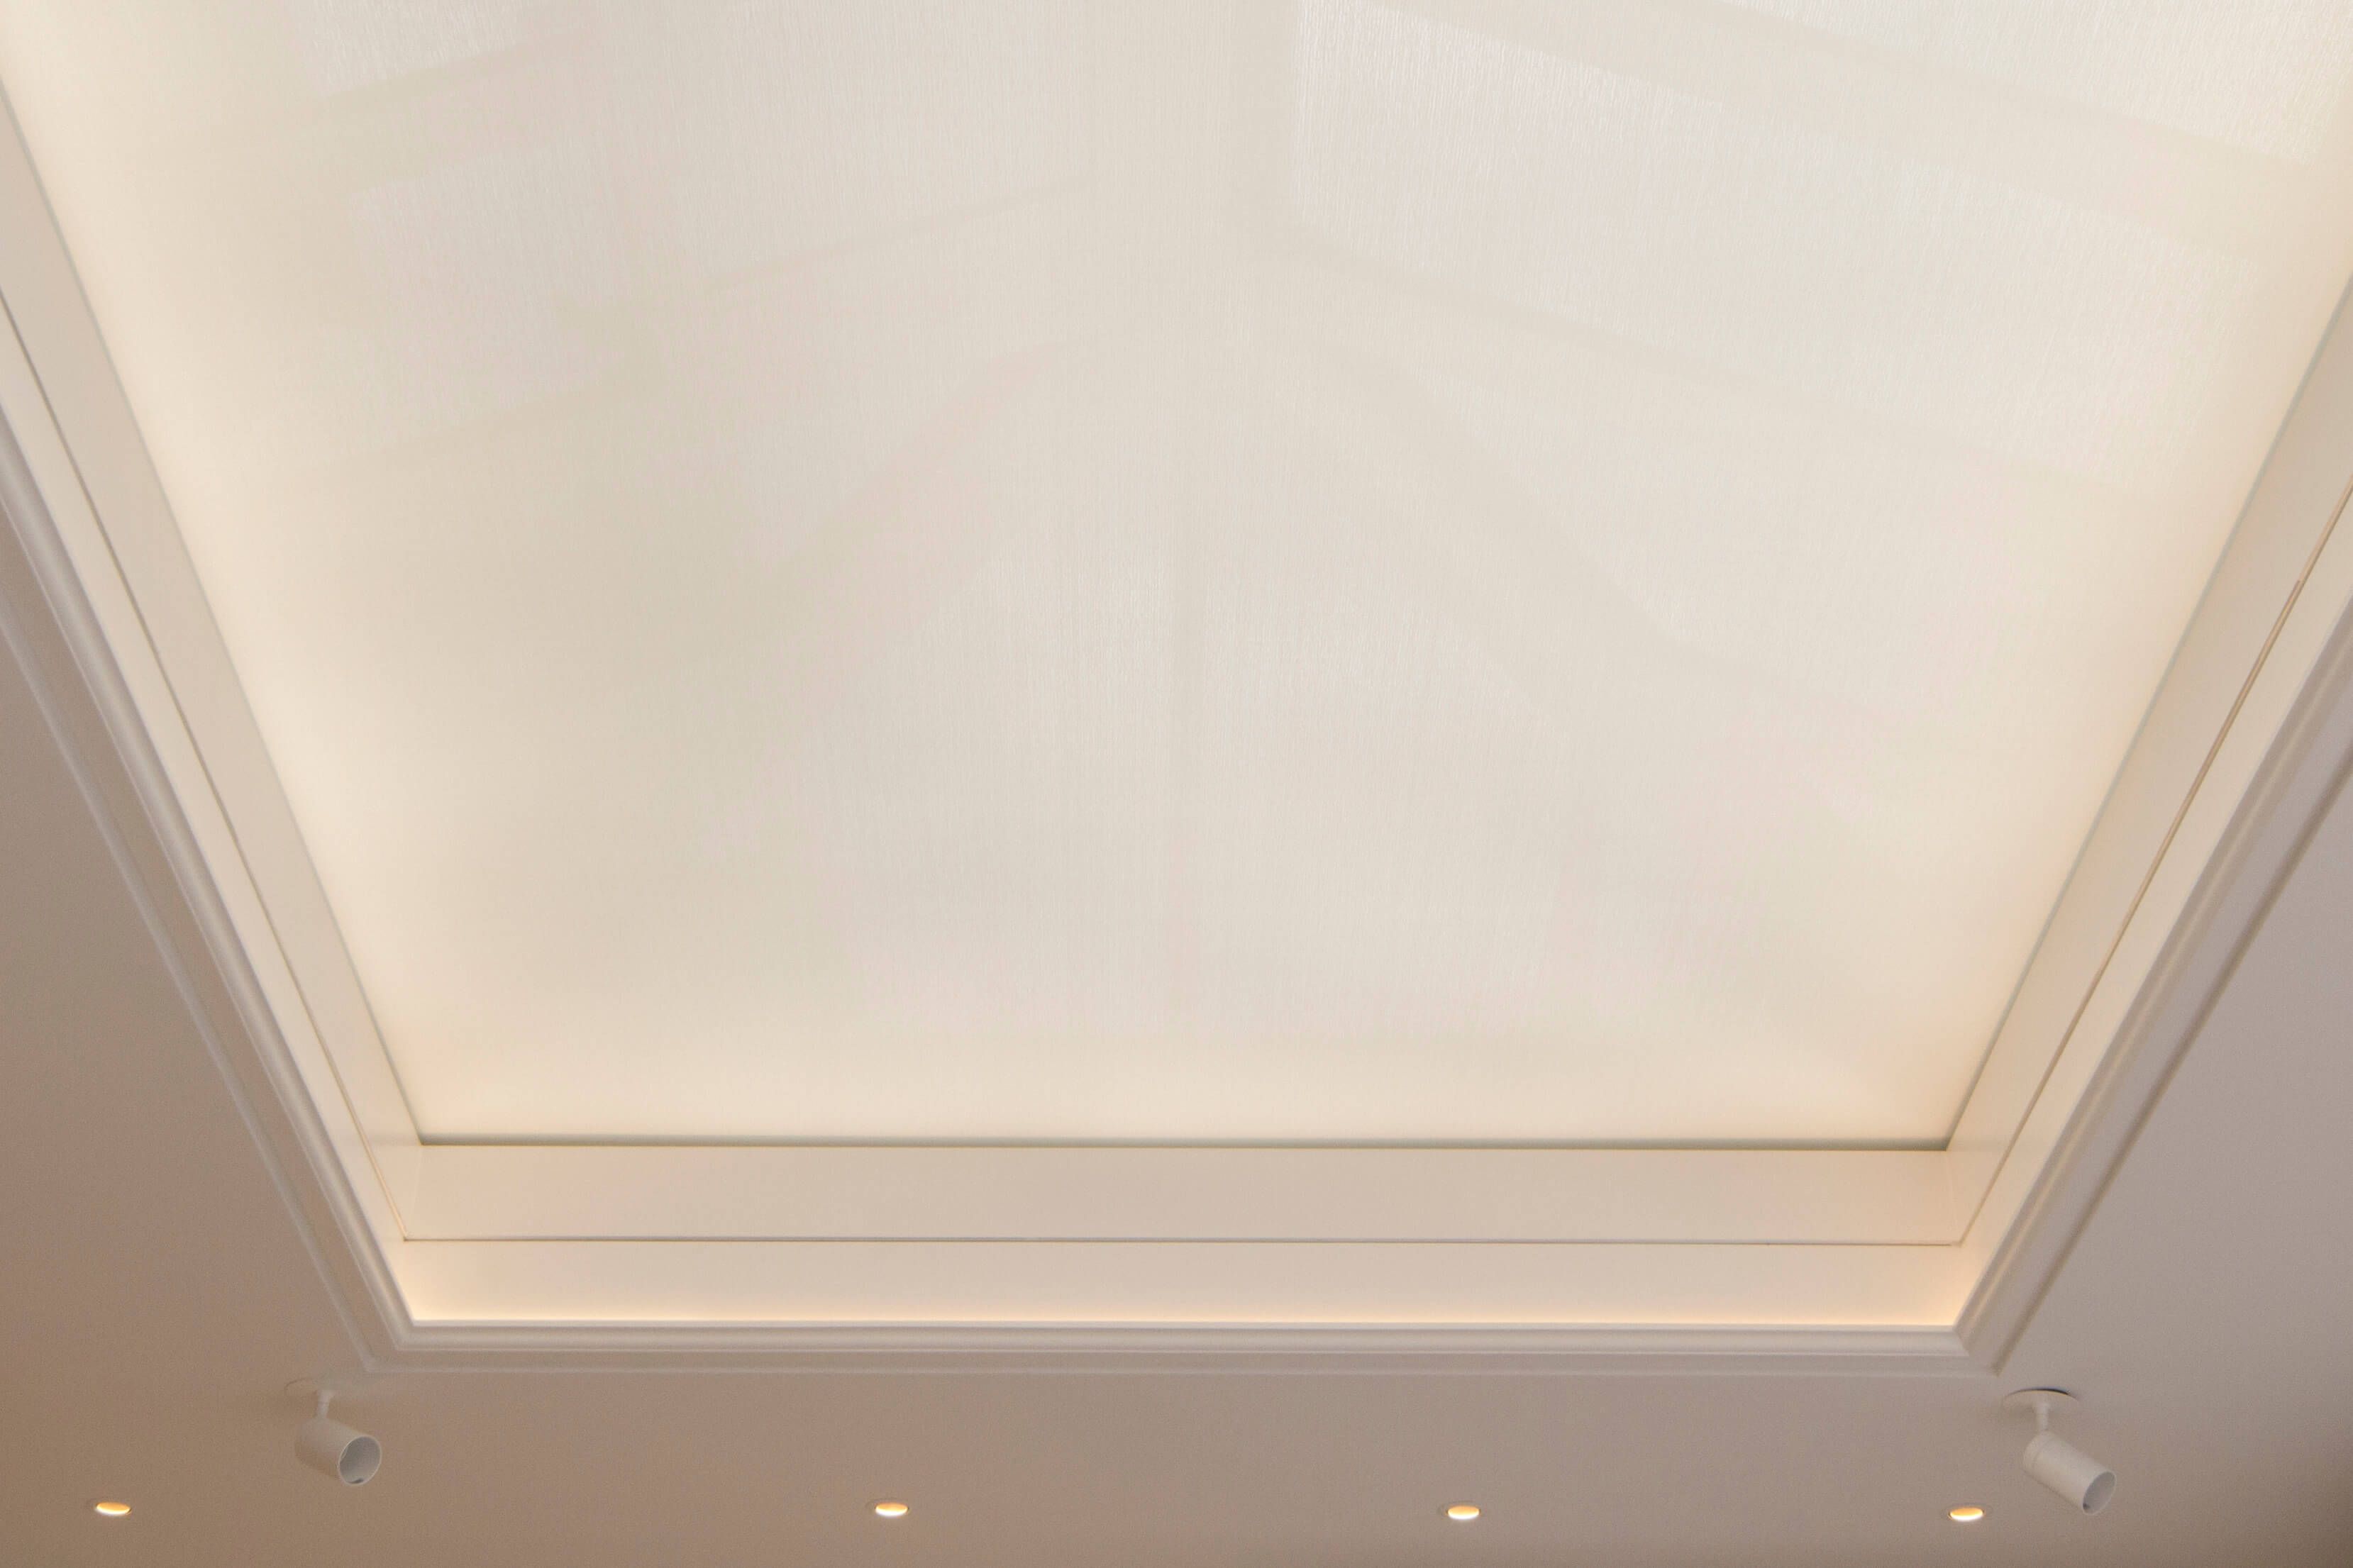 Concealing skylight blinds with Blindspace